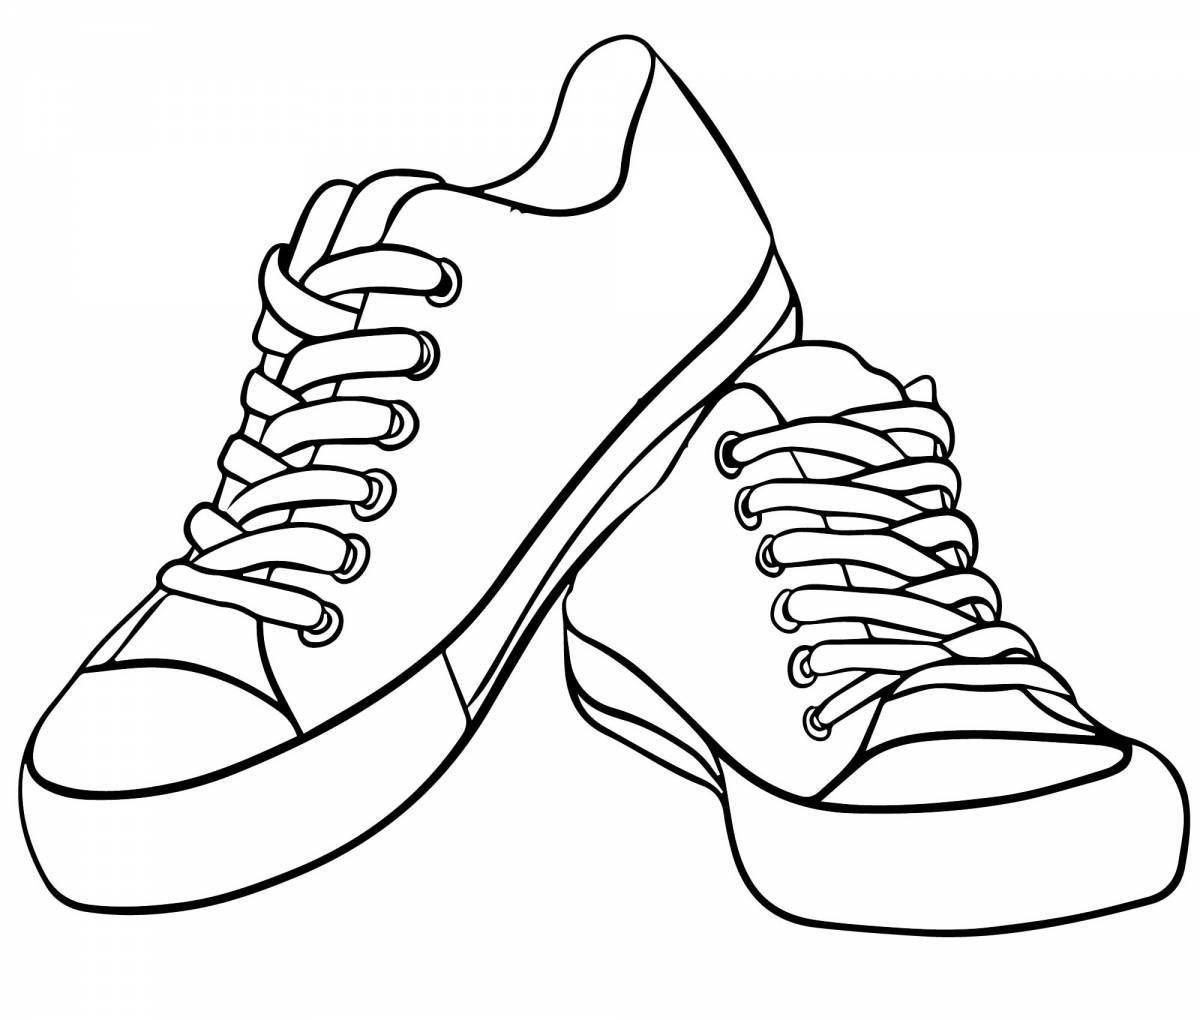 Coloring page glowing sneakers for preschoolers